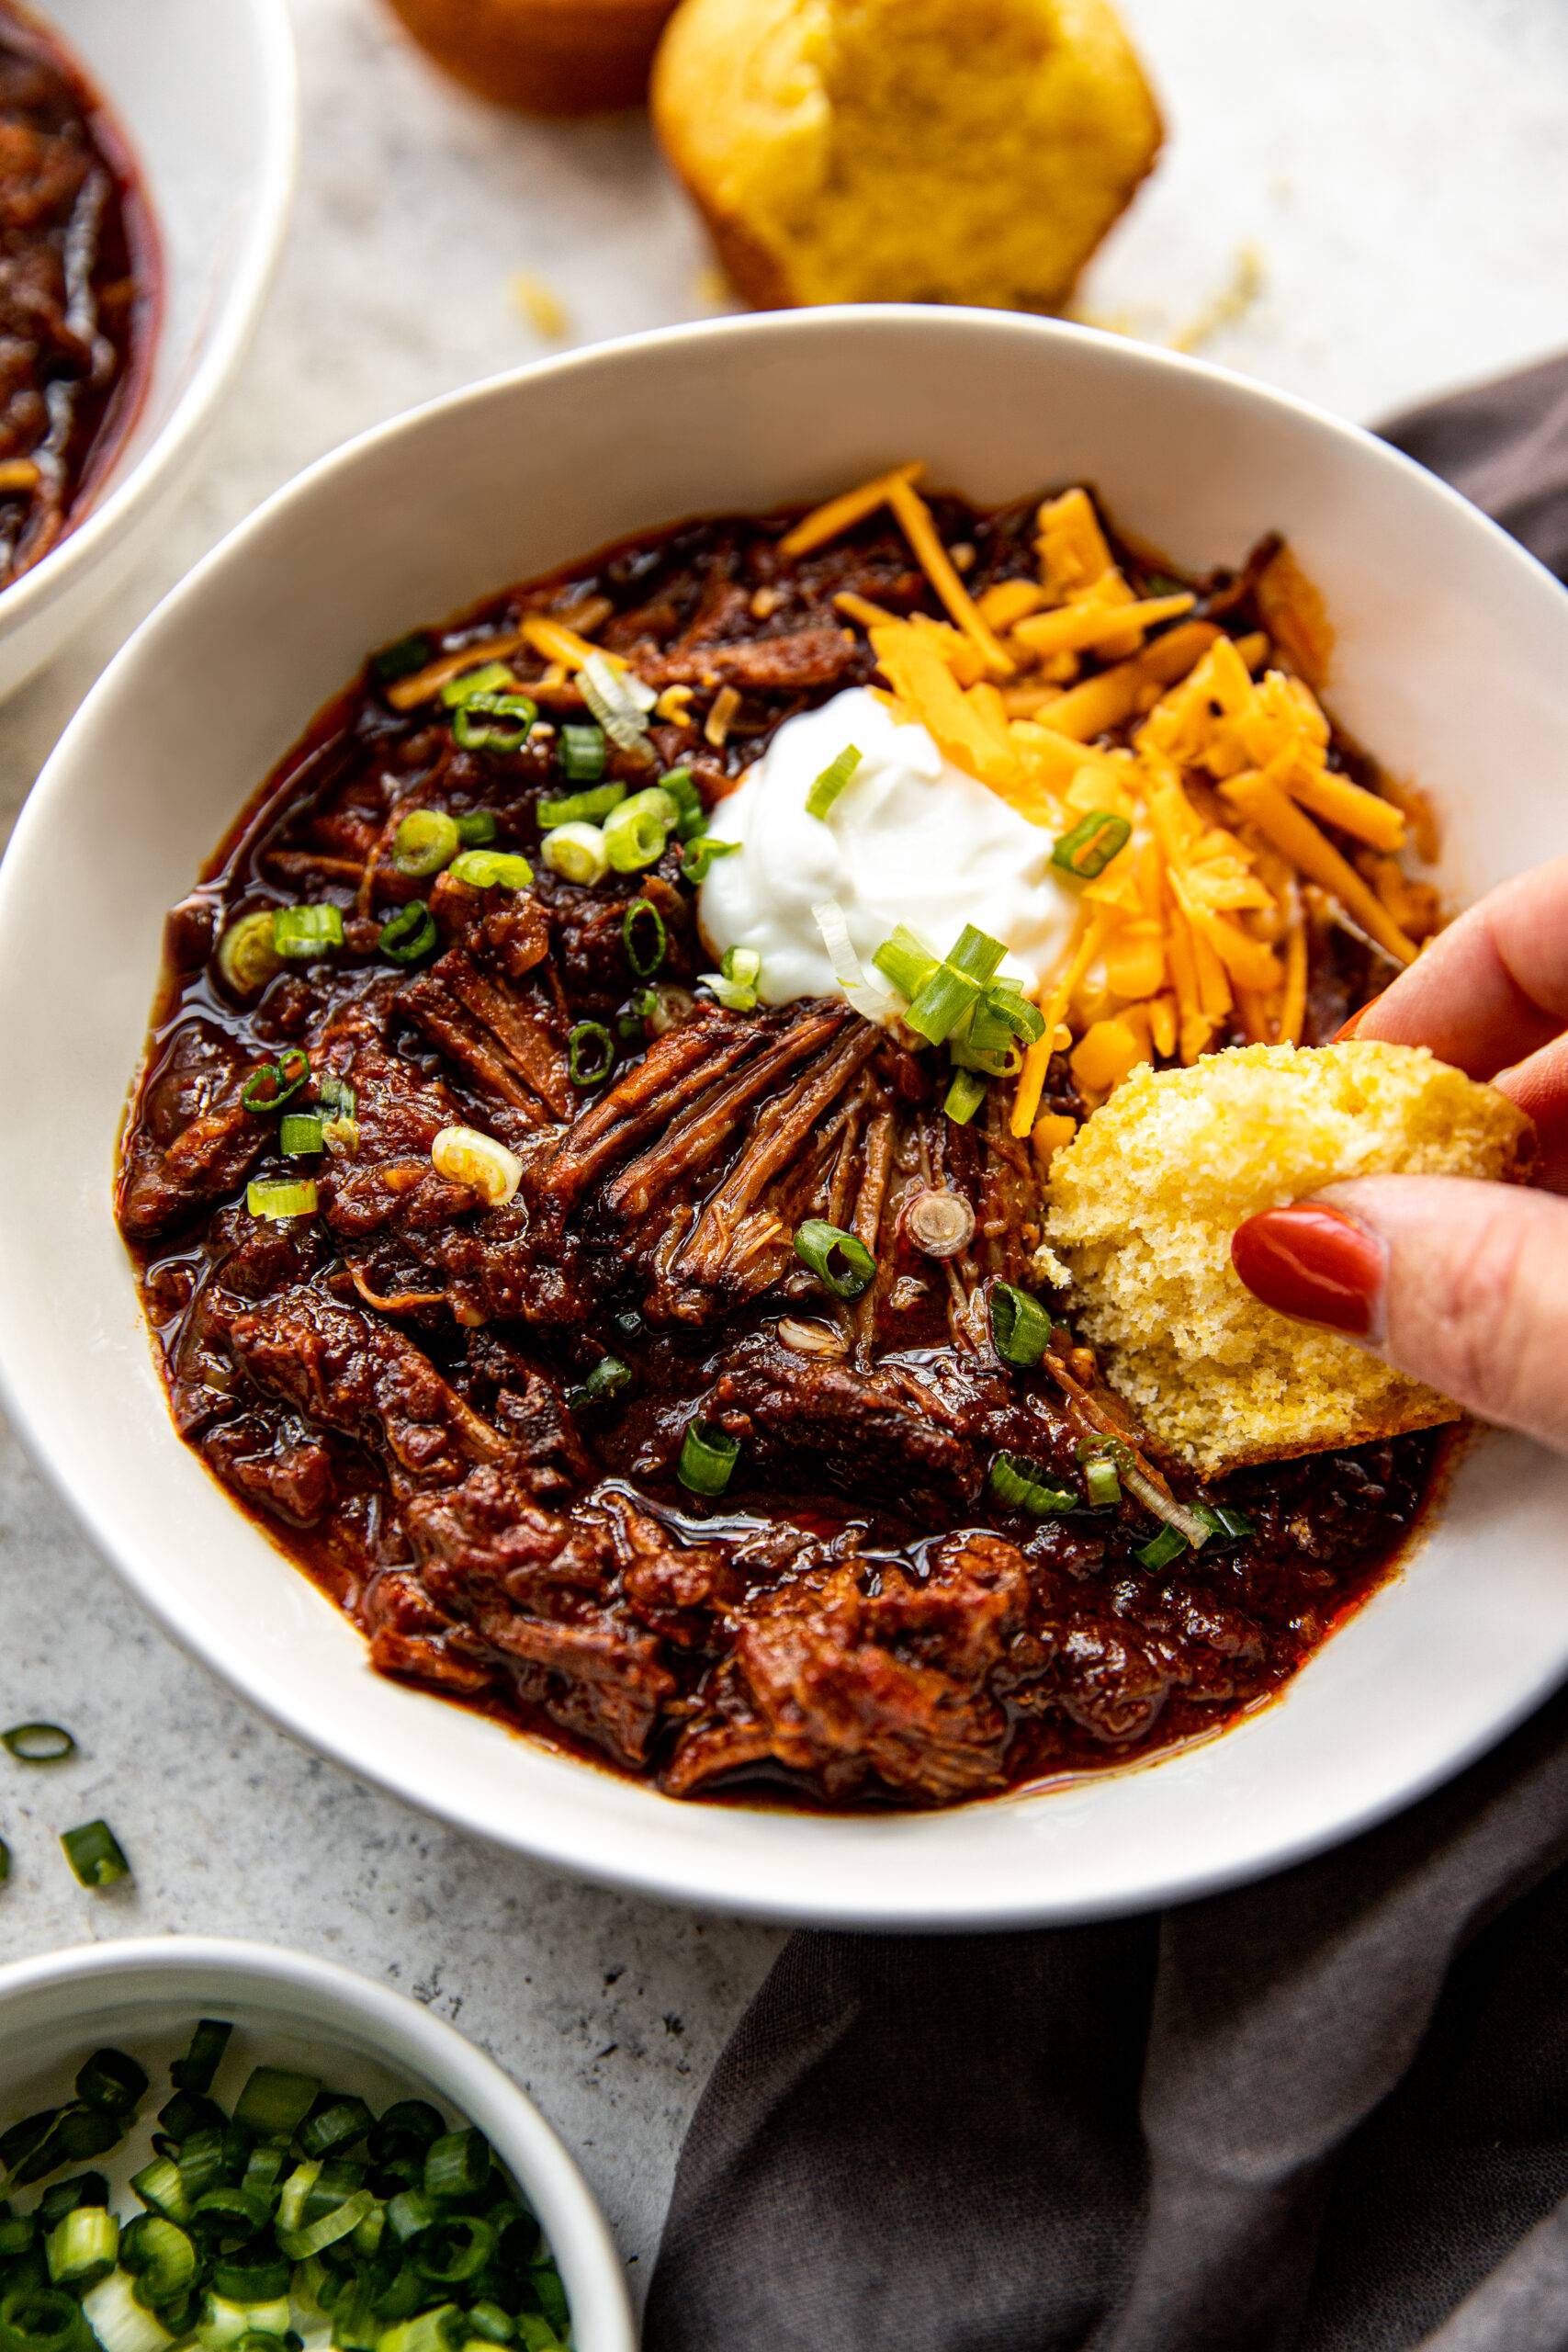 Dipping cornbread into a bowl of Texas chili with sour cream and cheese.